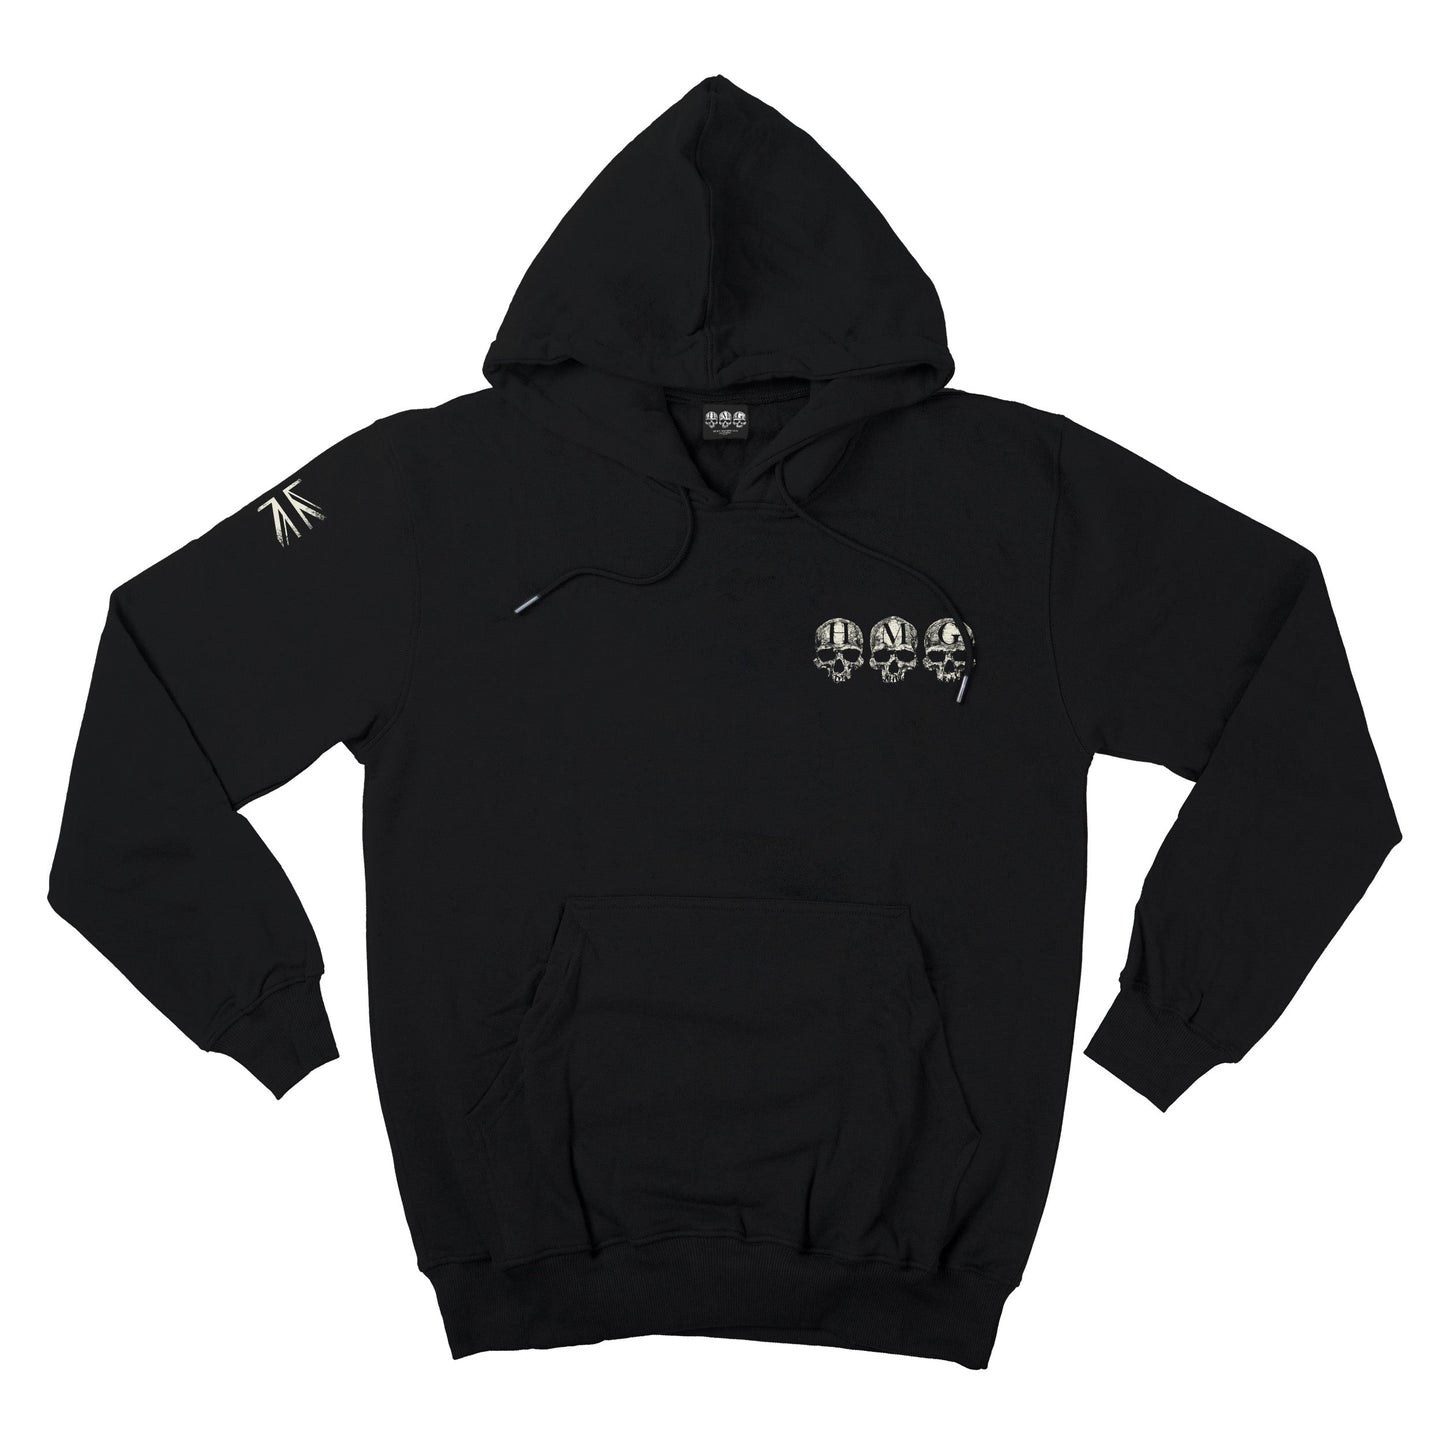 
                  
                    At Any Cost Hoodie
                  
                